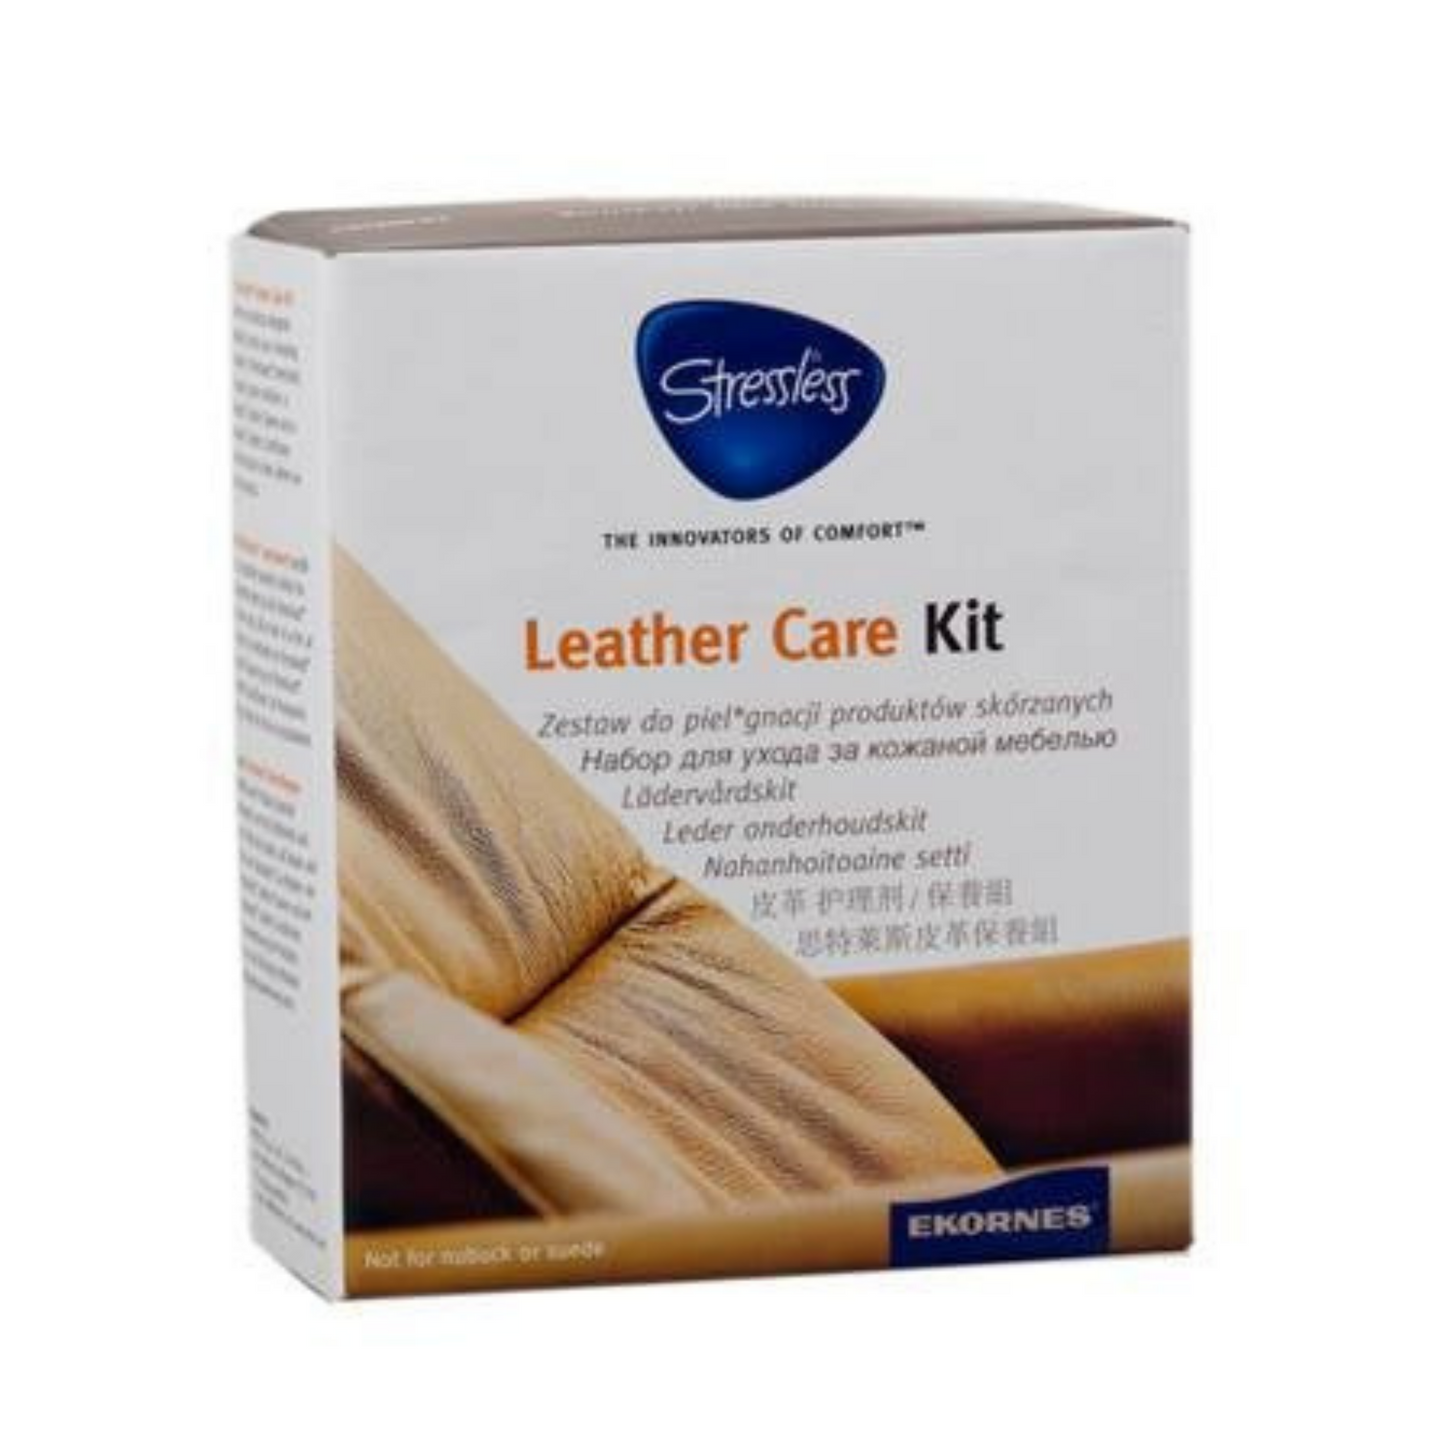 Leather Care Kit by Stressless